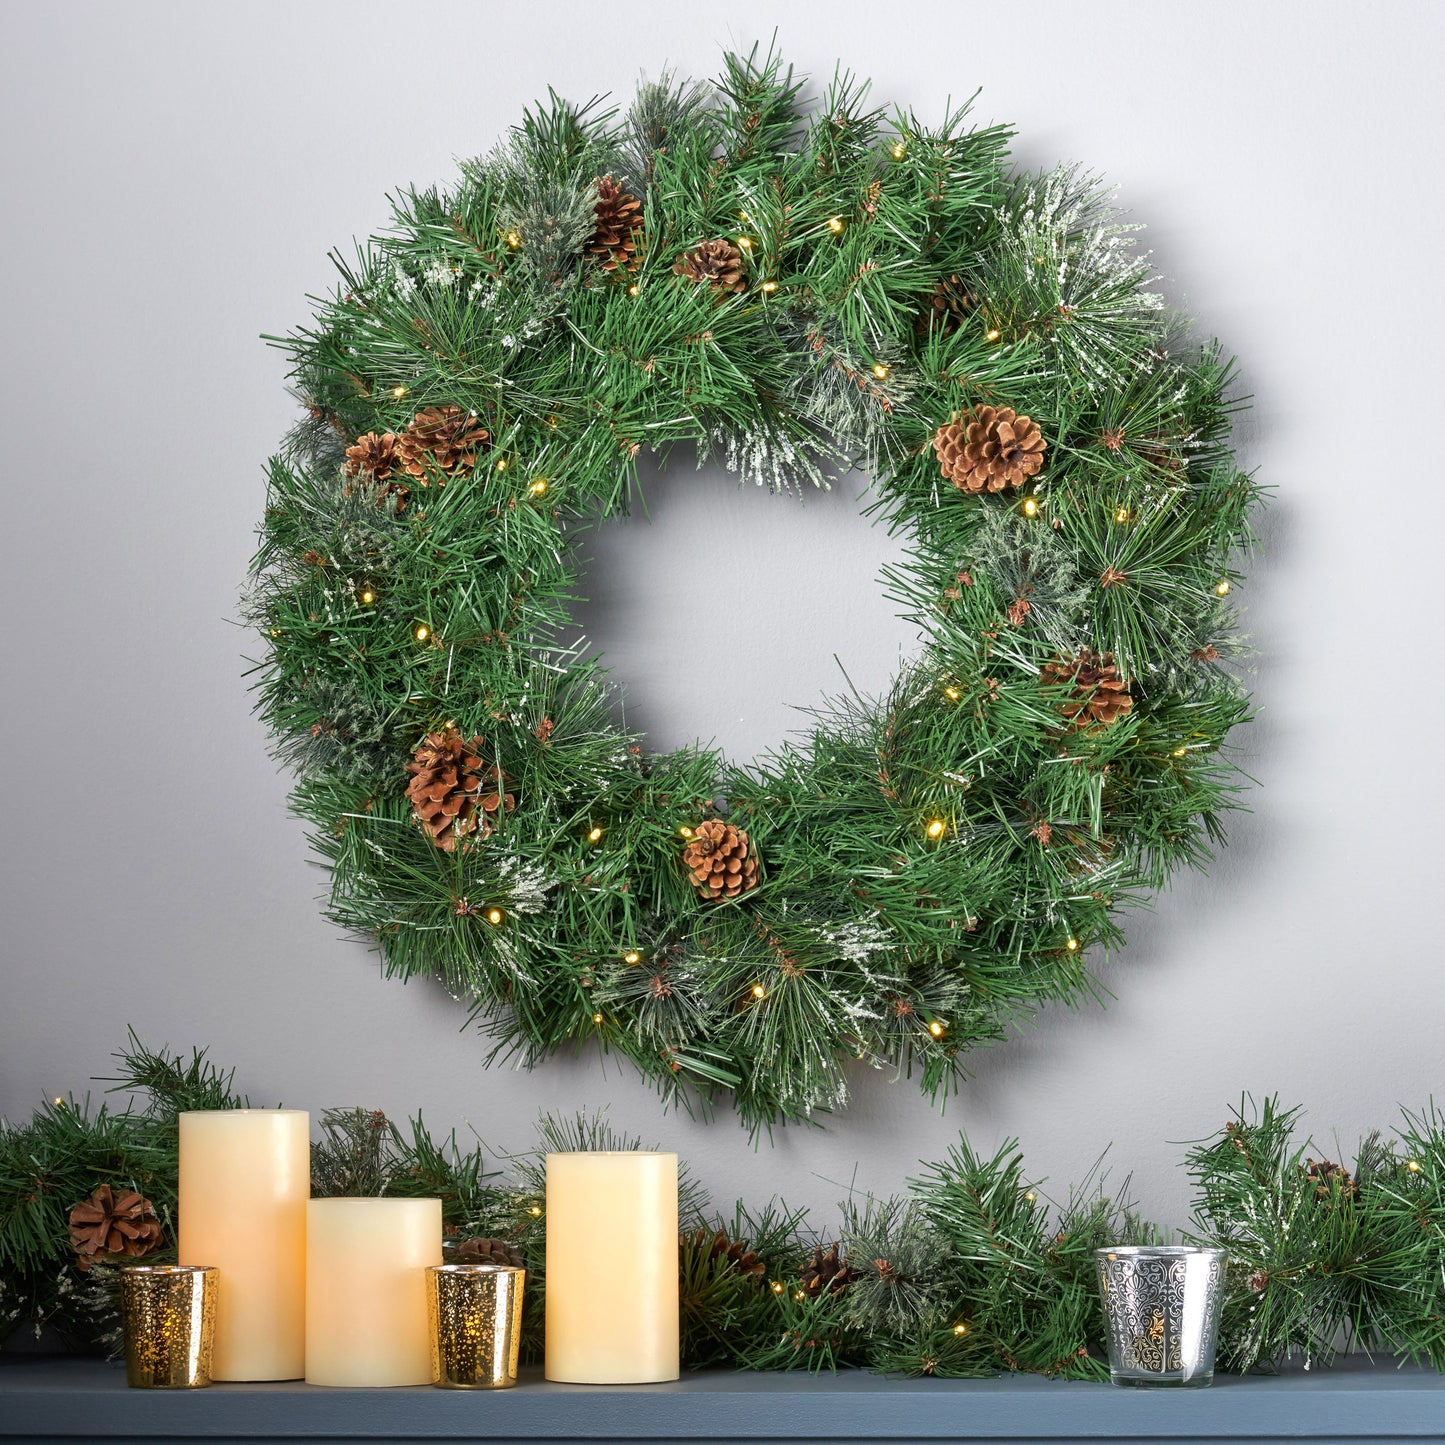 24" Cashmere Pine and Mixed Needles Warm White LED Artificial Christmas Wreath with Snowy Branches and Pinecones